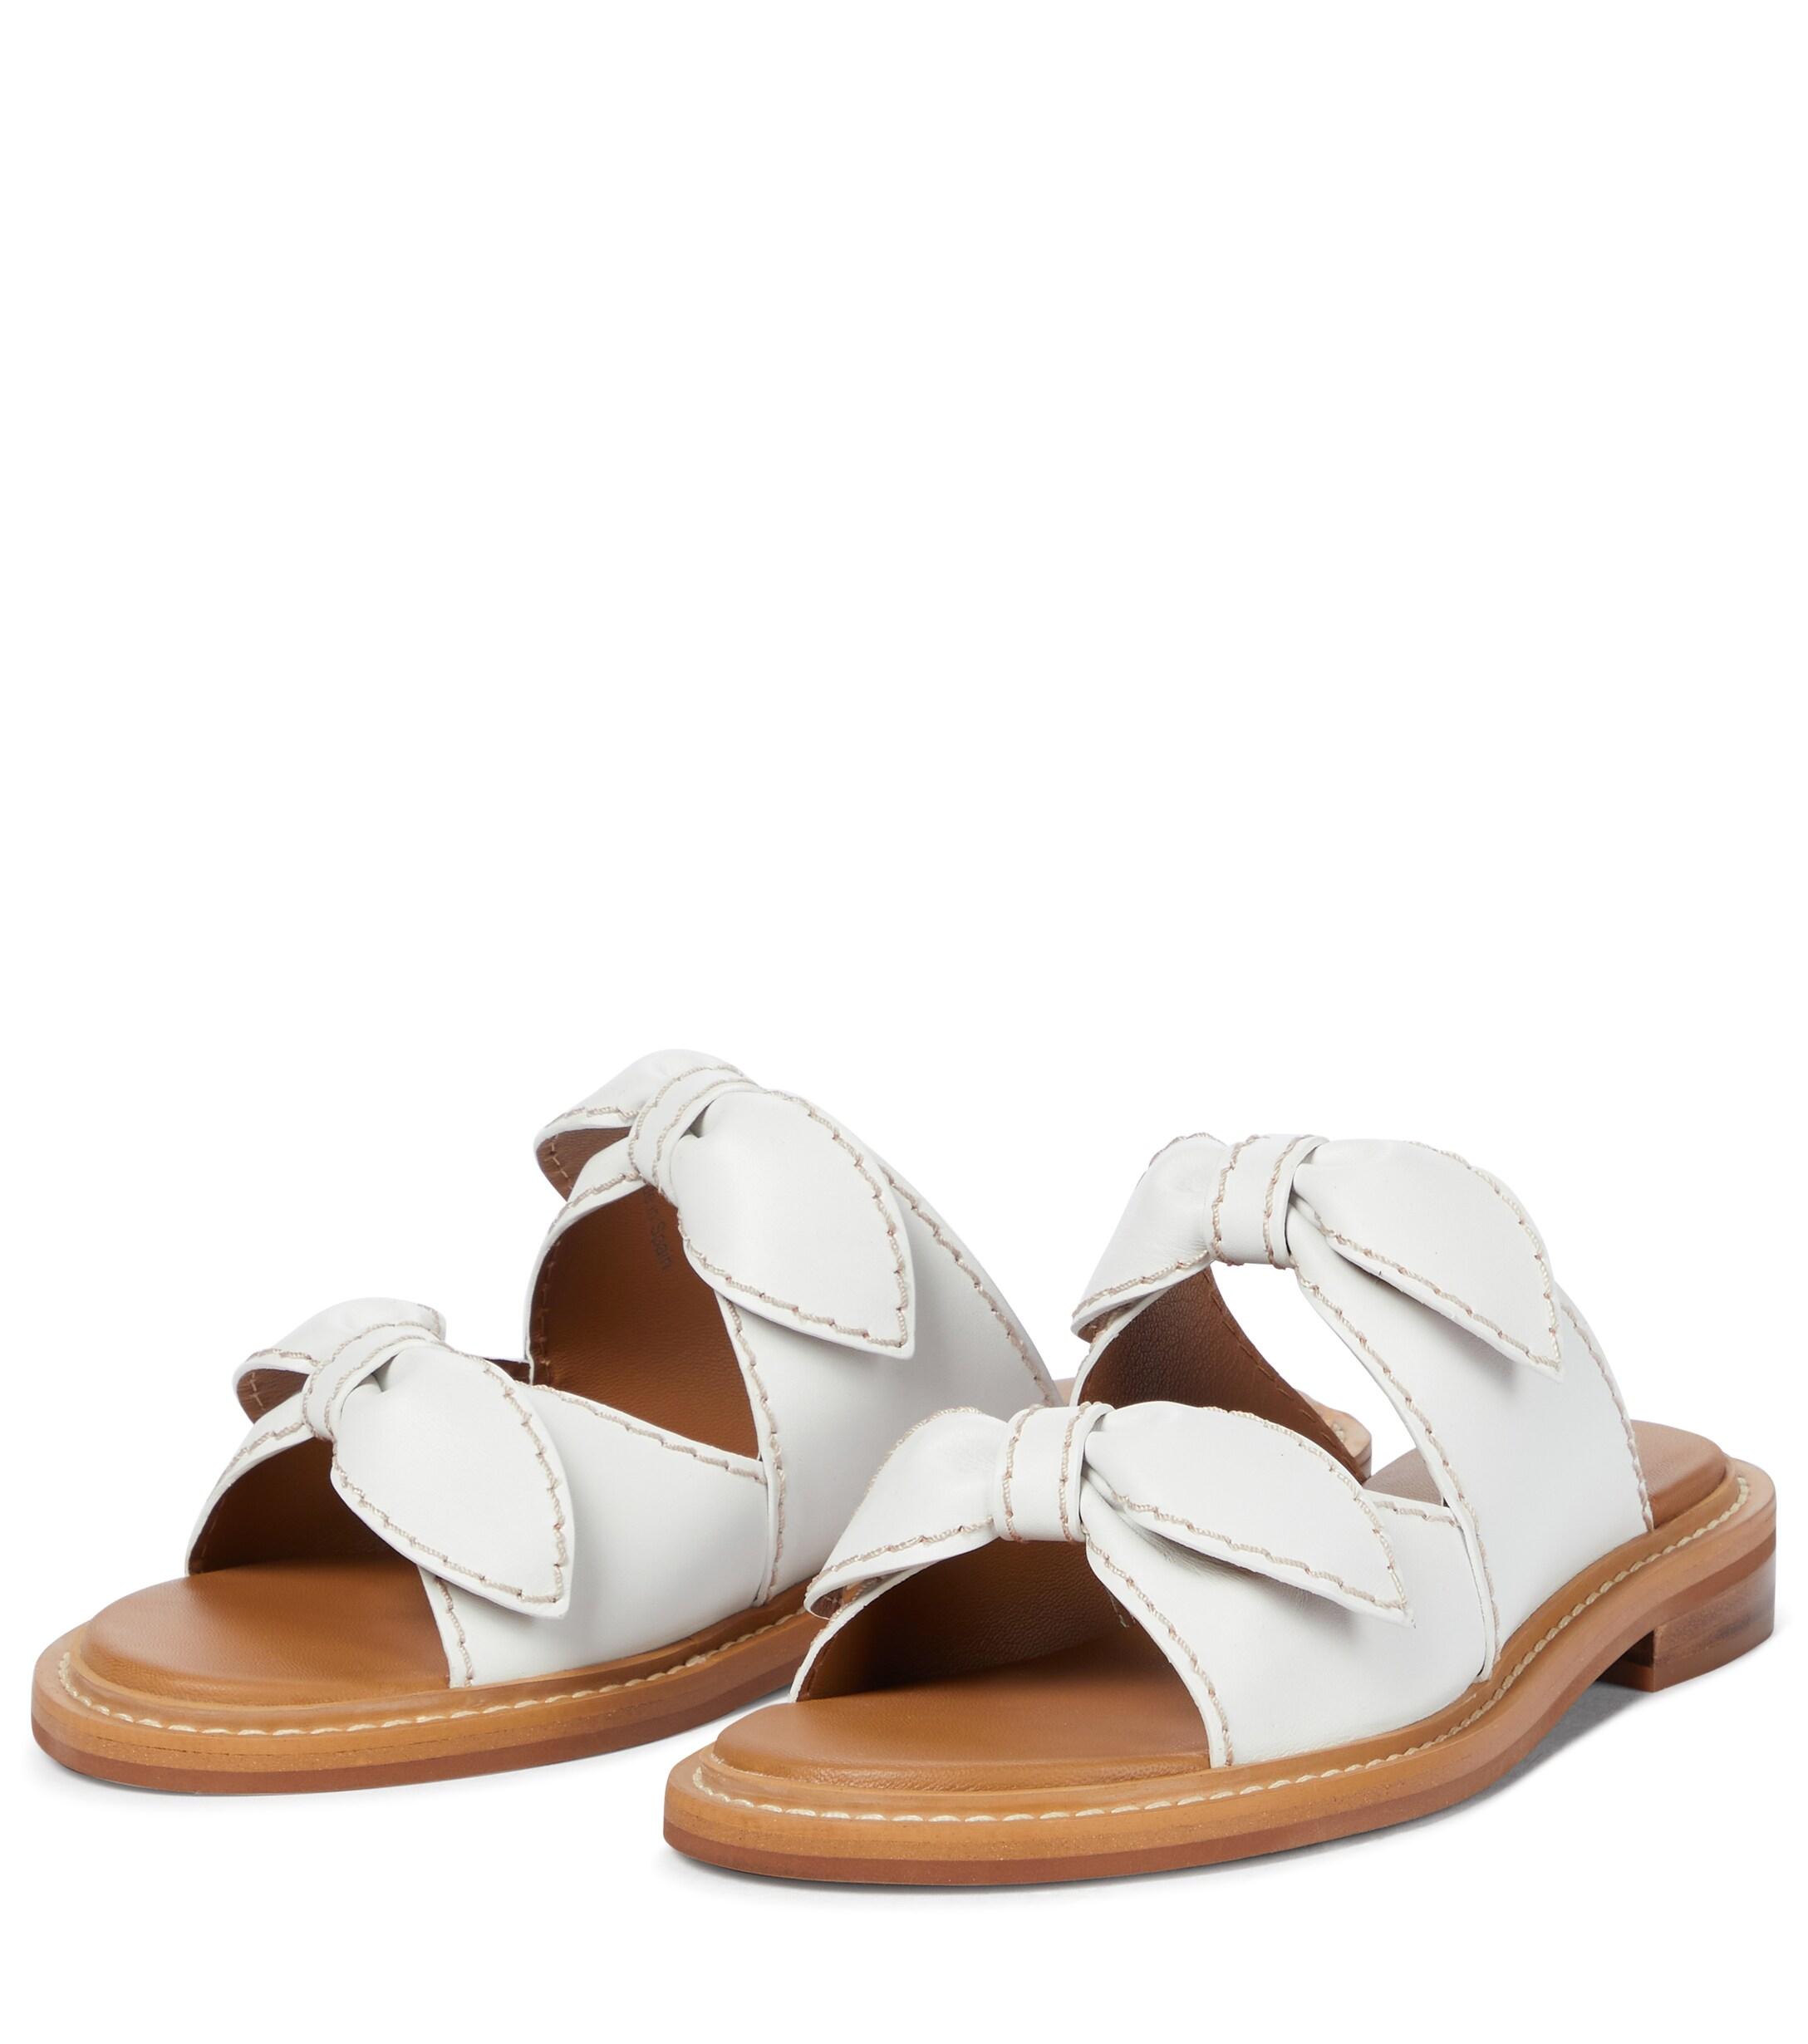 See By Chloé Kamilla Leather Sandals in White - Lyst